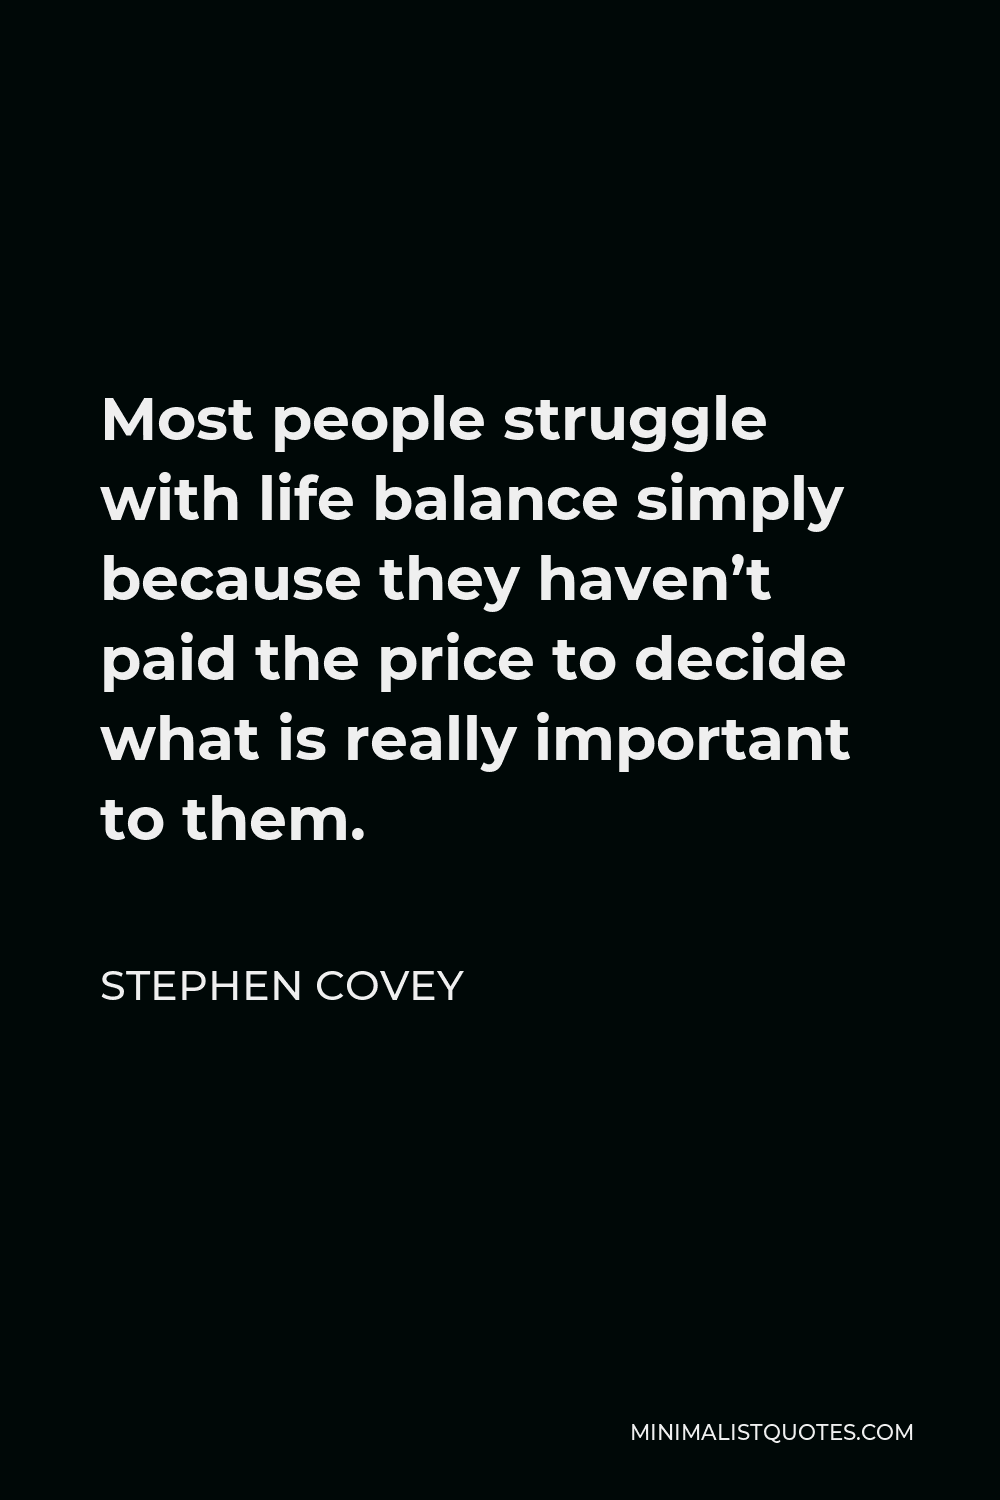 Stephen Covey Quote - Most people struggle with life balance simply because they haven’t paid the price to decide what is really important to them.